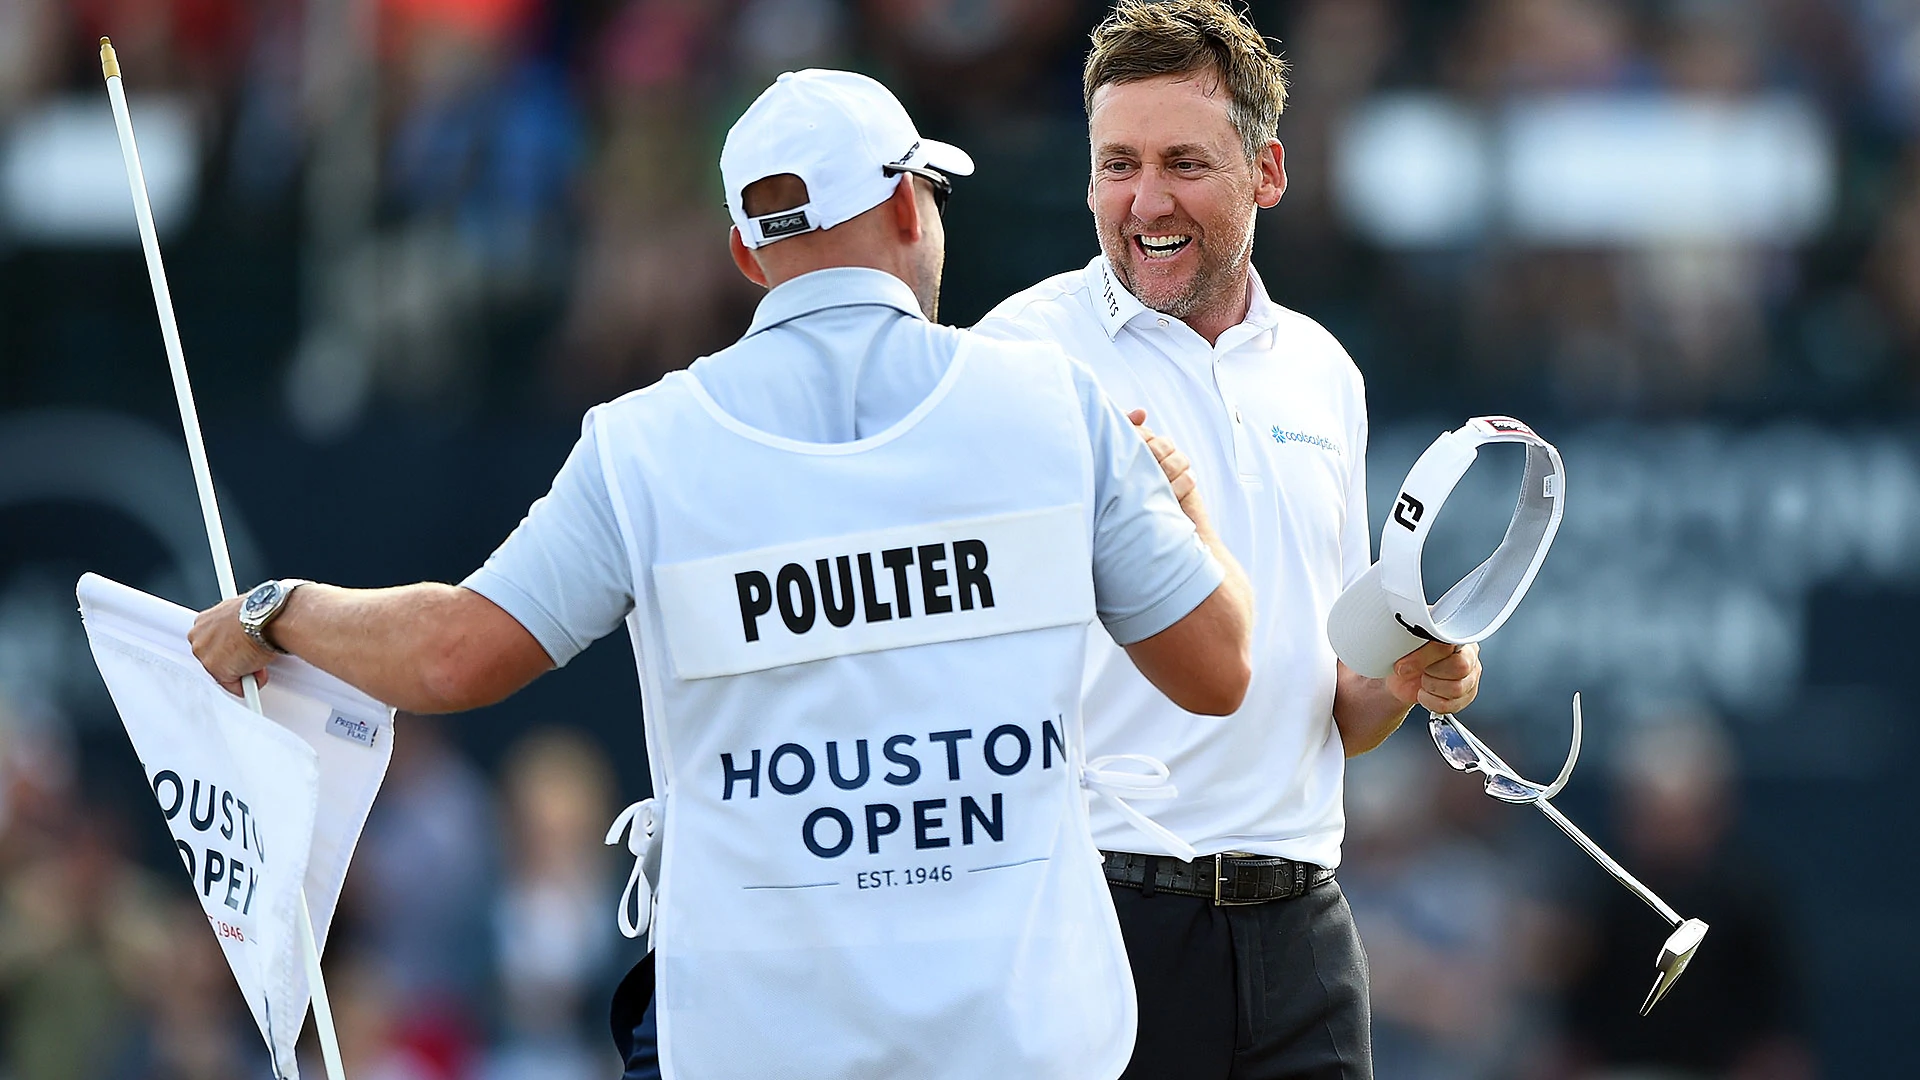 After Further Review: Poulter pumped for Ryder Cup